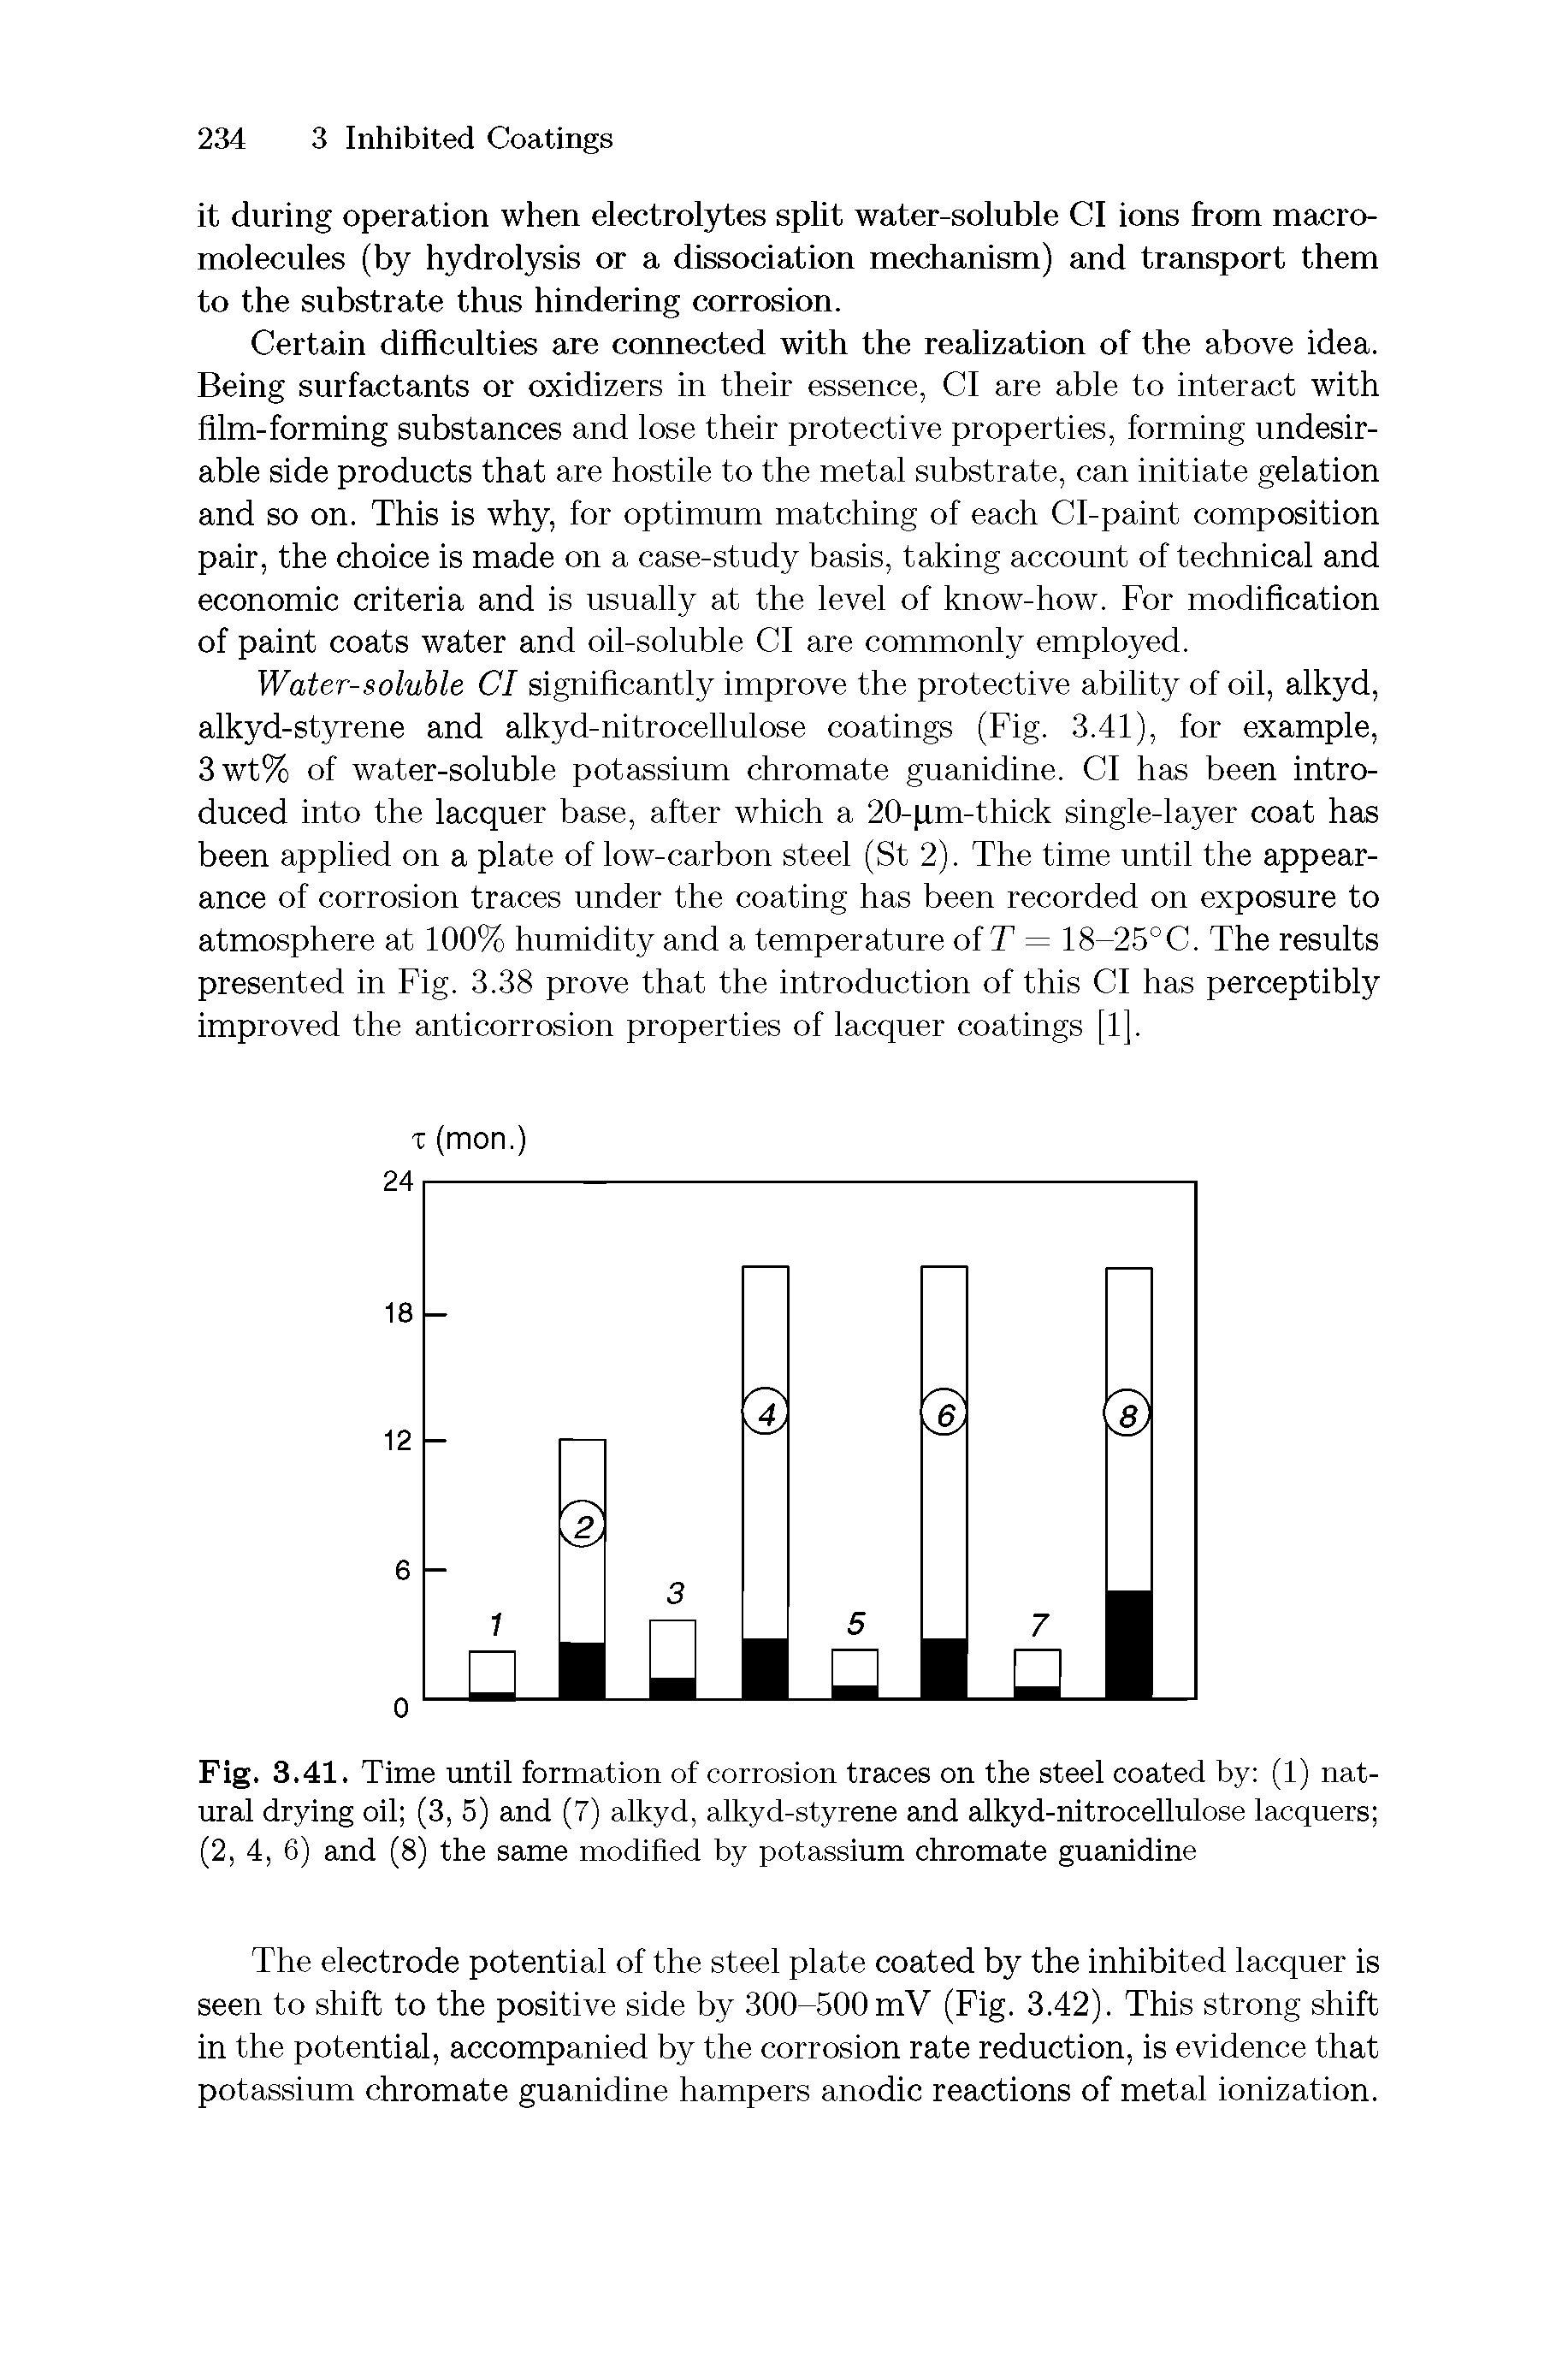 Fig. 3.41. Time until formation of corrosion traces on the steel coated by (1) natural drying oil (3, 5) and (7) alkyd, alkyd-styrene and alkyd-nitrocellulose lacquers (2, 4, 6) and (8) the same modified by potassium chromate guanidine...